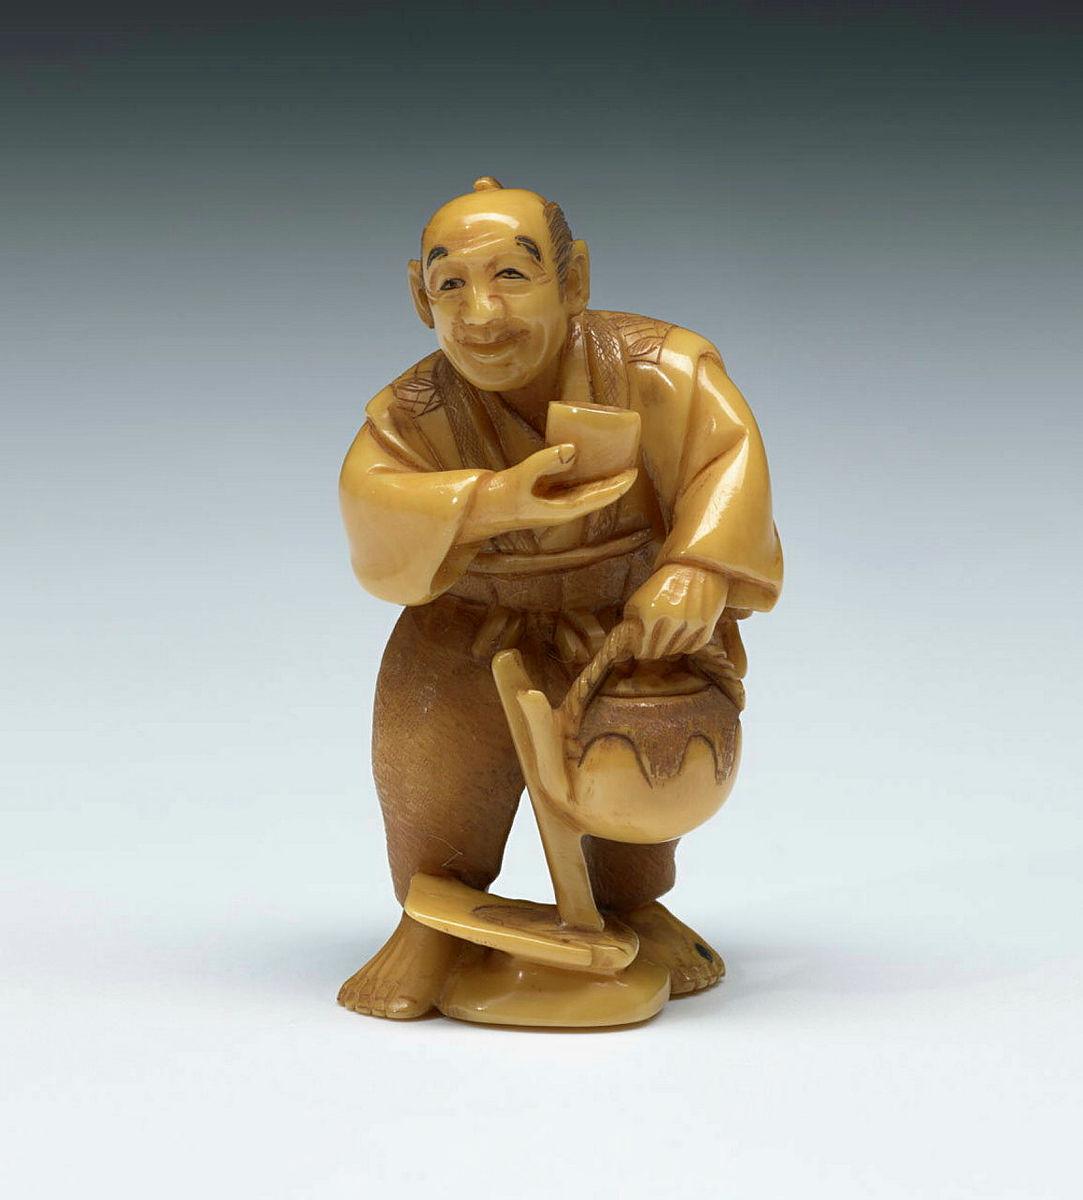 Artwork Netsuke (vendor serving tea) this artwork made of Ivory, carved and incised, created in 1800-01-01